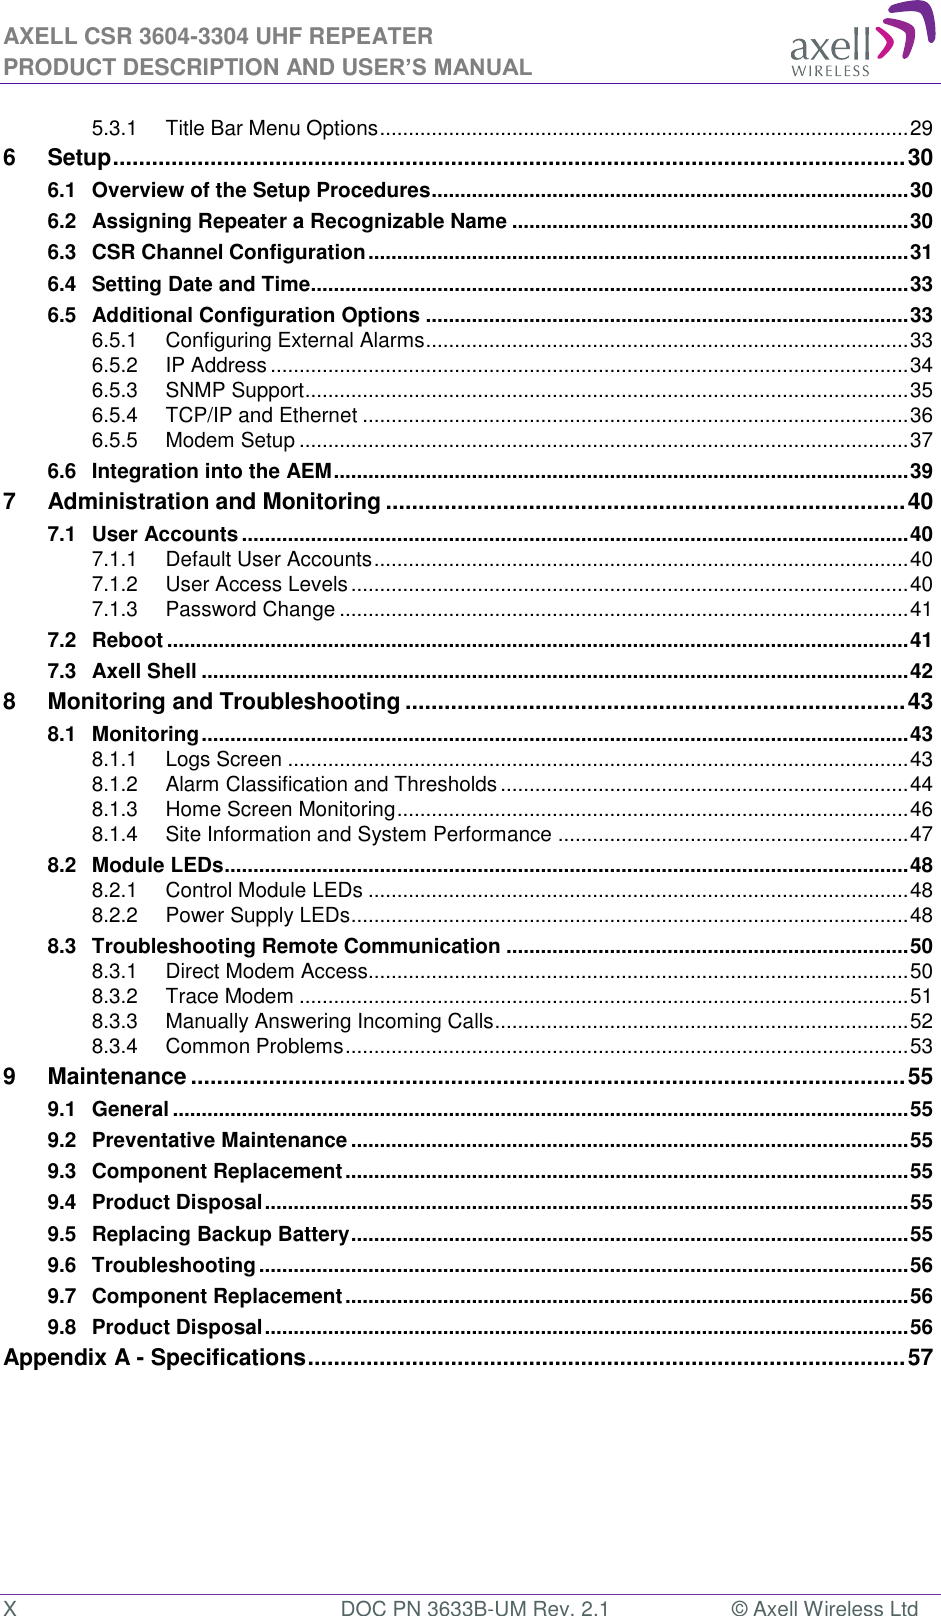 AXELL CSR 3604-3304 UHF REPEATER PRODUCT DESCRIPTION AND USER’S MANUAL  X  DOC PN 3633B-UM Rev. 2.1  © Axell Wireless Ltd  5.3.1 Title Bar Menu Options ............................................................................................ 29 6 Setup .......................................................................................................................... 30 6.1 Overview of the Setup Procedures ................................................................................... 30 6.2 Assigning Repeater a Recognizable Name ..................................................................... 30 6.3 CSR Channel Configuration .............................................................................................. 31 6.4 Setting Date and Time........................................................................................................ 33 6.5 Additional Configuration Options .................................................................................... 33 6.5.1 Configuring External Alarms .................................................................................... 33 6.5.2 IP Address ............................................................................................................... 34 6.5.3 SNMP Support ......................................................................................................... 35 6.5.4 TCP/IP and Ethernet ............................................................................................... 36 6.5.5 Modem Setup .......................................................................................................... 37 6.6 Integration into the AEM .................................................................................................... 39 7 Administration and Monitoring ................................................................................ 40 7.1 User Accounts .................................................................................................................... 40 7.1.1 Default User Accounts ............................................................................................. 40 7.1.2 User Access Levels ................................................................................................. 40 7.1.3 Password Change ................................................................................................... 41 7.2 Reboot ................................................................................................................................. 41 7.3 Axell Shell ........................................................................................................................... 42 8 Monitoring and Troubleshooting ............................................................................. 43 8.1 Monitoring ........................................................................................................................... 43 8.1.1 Logs Screen ............................................................................................................ 43 8.1.2 Alarm Classification and Thresholds ....................................................................... 44 8.1.3 Home Screen Monitoring ......................................................................................... 46 8.1.4 Site Information and System Performance ............................................................. 47 8.2 Module LEDs ....................................................................................................................... 48 8.2.1 Control Module LEDs .............................................................................................. 48 8.2.2 Power Supply LEDs................................................................................................. 48 8.3 Troubleshooting Remote Communication ...................................................................... 50 8.3.1 Direct Modem Access.............................................................................................. 50 8.3.2 Trace Modem .......................................................................................................... 51 8.3.3 Manually Answering Incoming Calls ........................................................................ 52 8.3.4 Common Problems .................................................................................................. 53 9 Maintenance .............................................................................................................. 55 9.1 General ................................................................................................................................ 55 9.2 Preventative Maintenance ................................................................................................. 55 9.3 Component Replacement .................................................................................................. 55 9.4 Product Disposal ................................................................................................................ 55 9.5 Replacing Backup Battery ................................................................................................. 55 9.6 Troubleshooting ................................................................................................................. 56 9.7 Component Replacement .................................................................................................. 56 9.8 Product Disposal ................................................................................................................ 56 Appendix A - Specifications ............................................................................................ 57      